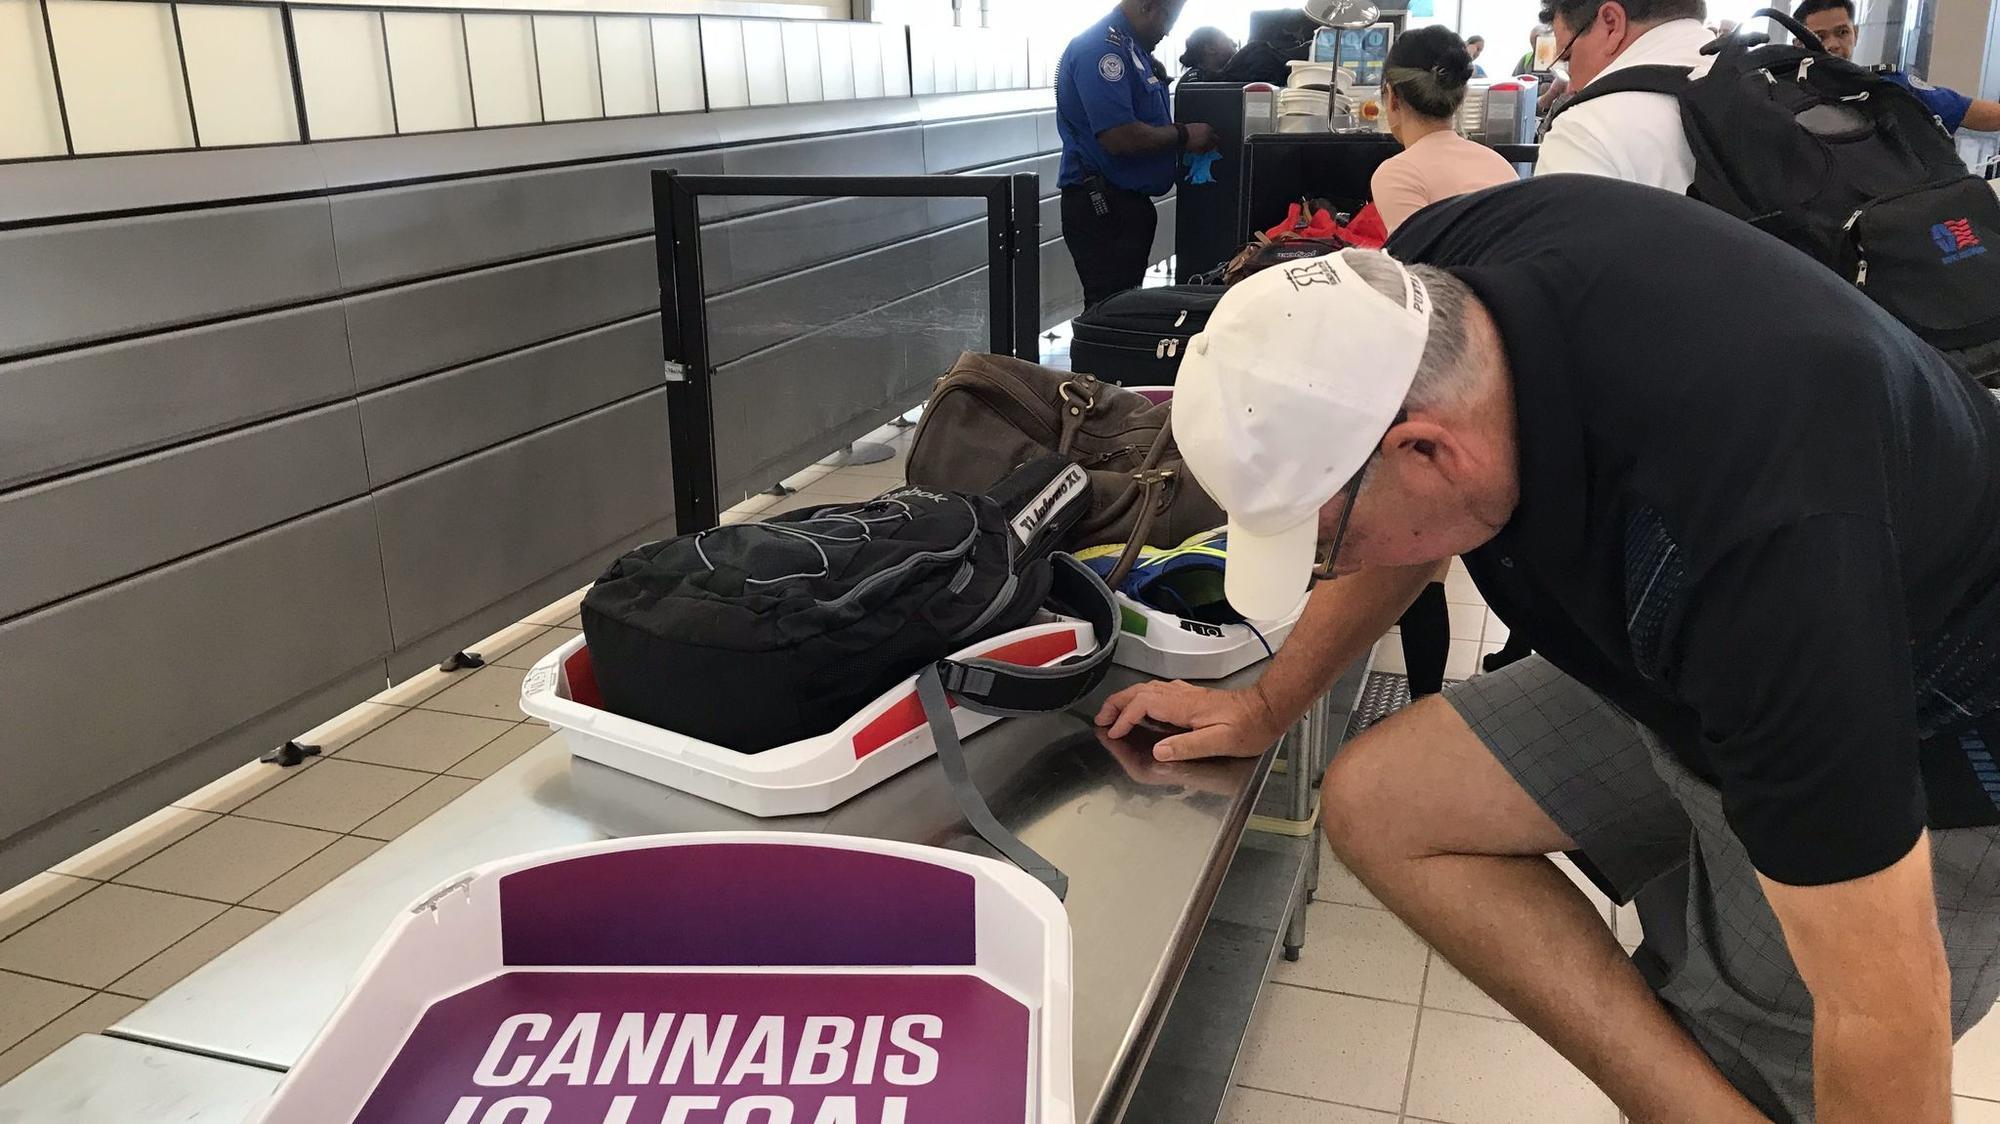 California Another cultural tipping point Cannabis ads appear in TSA checkpoint trays at Ontario airport